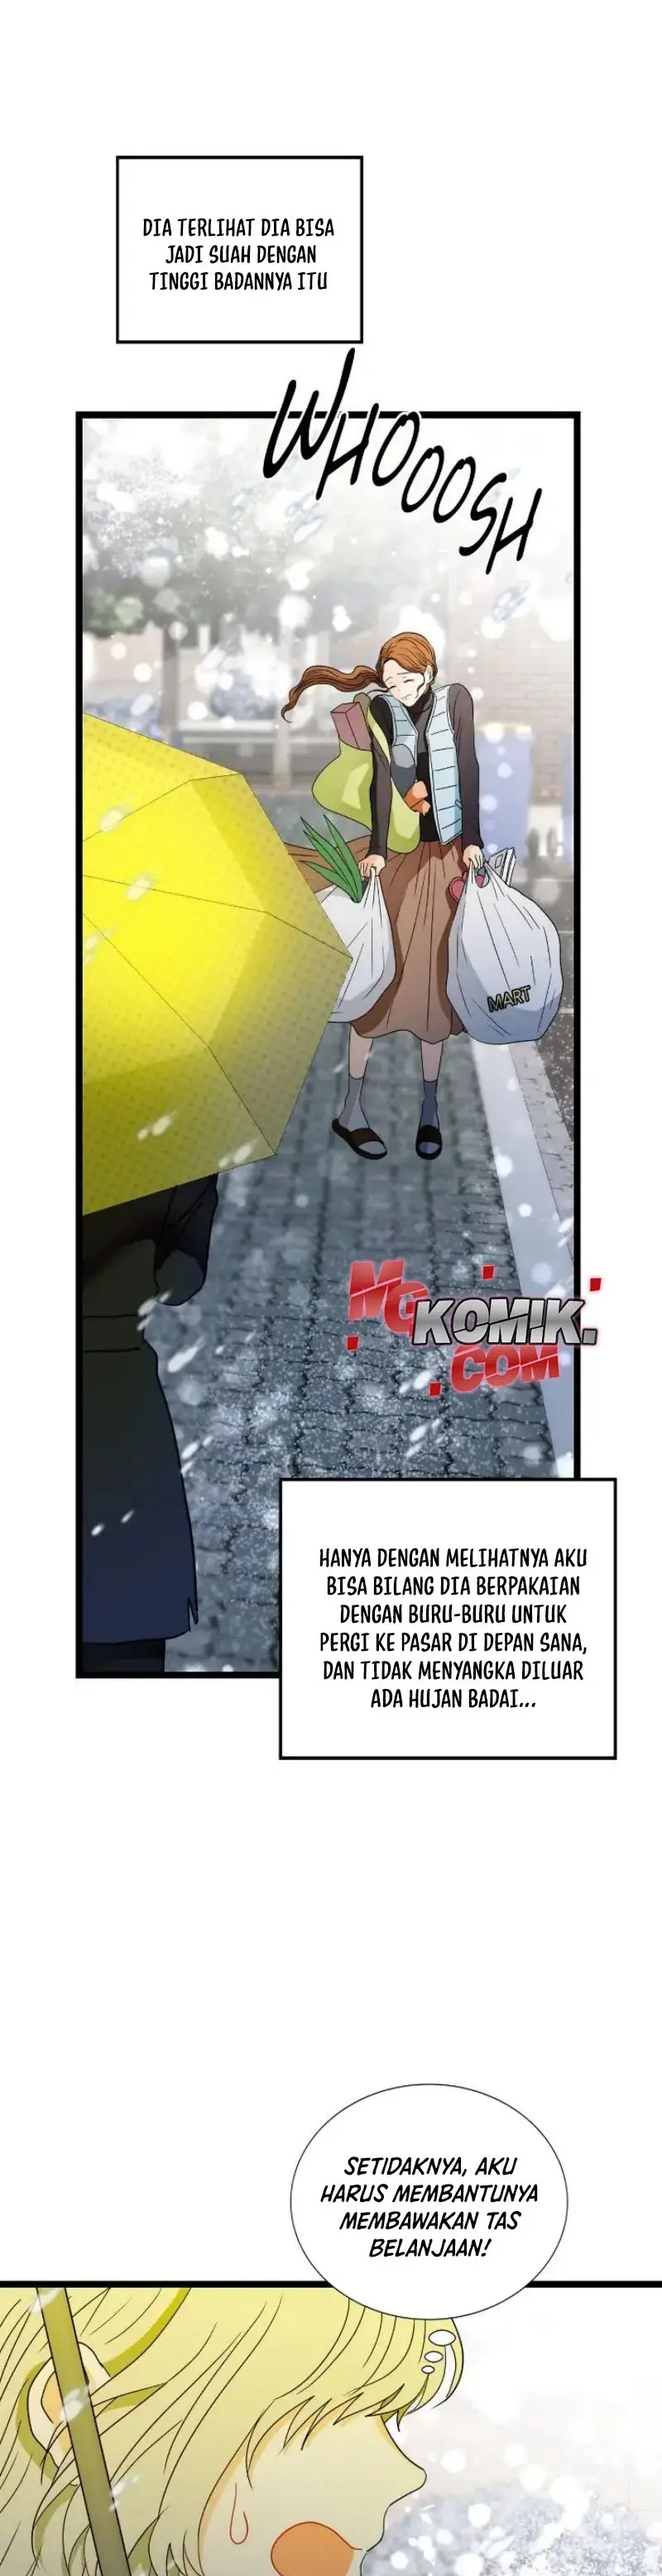 King In The City Chapter 113 - Epilog 8 - 261